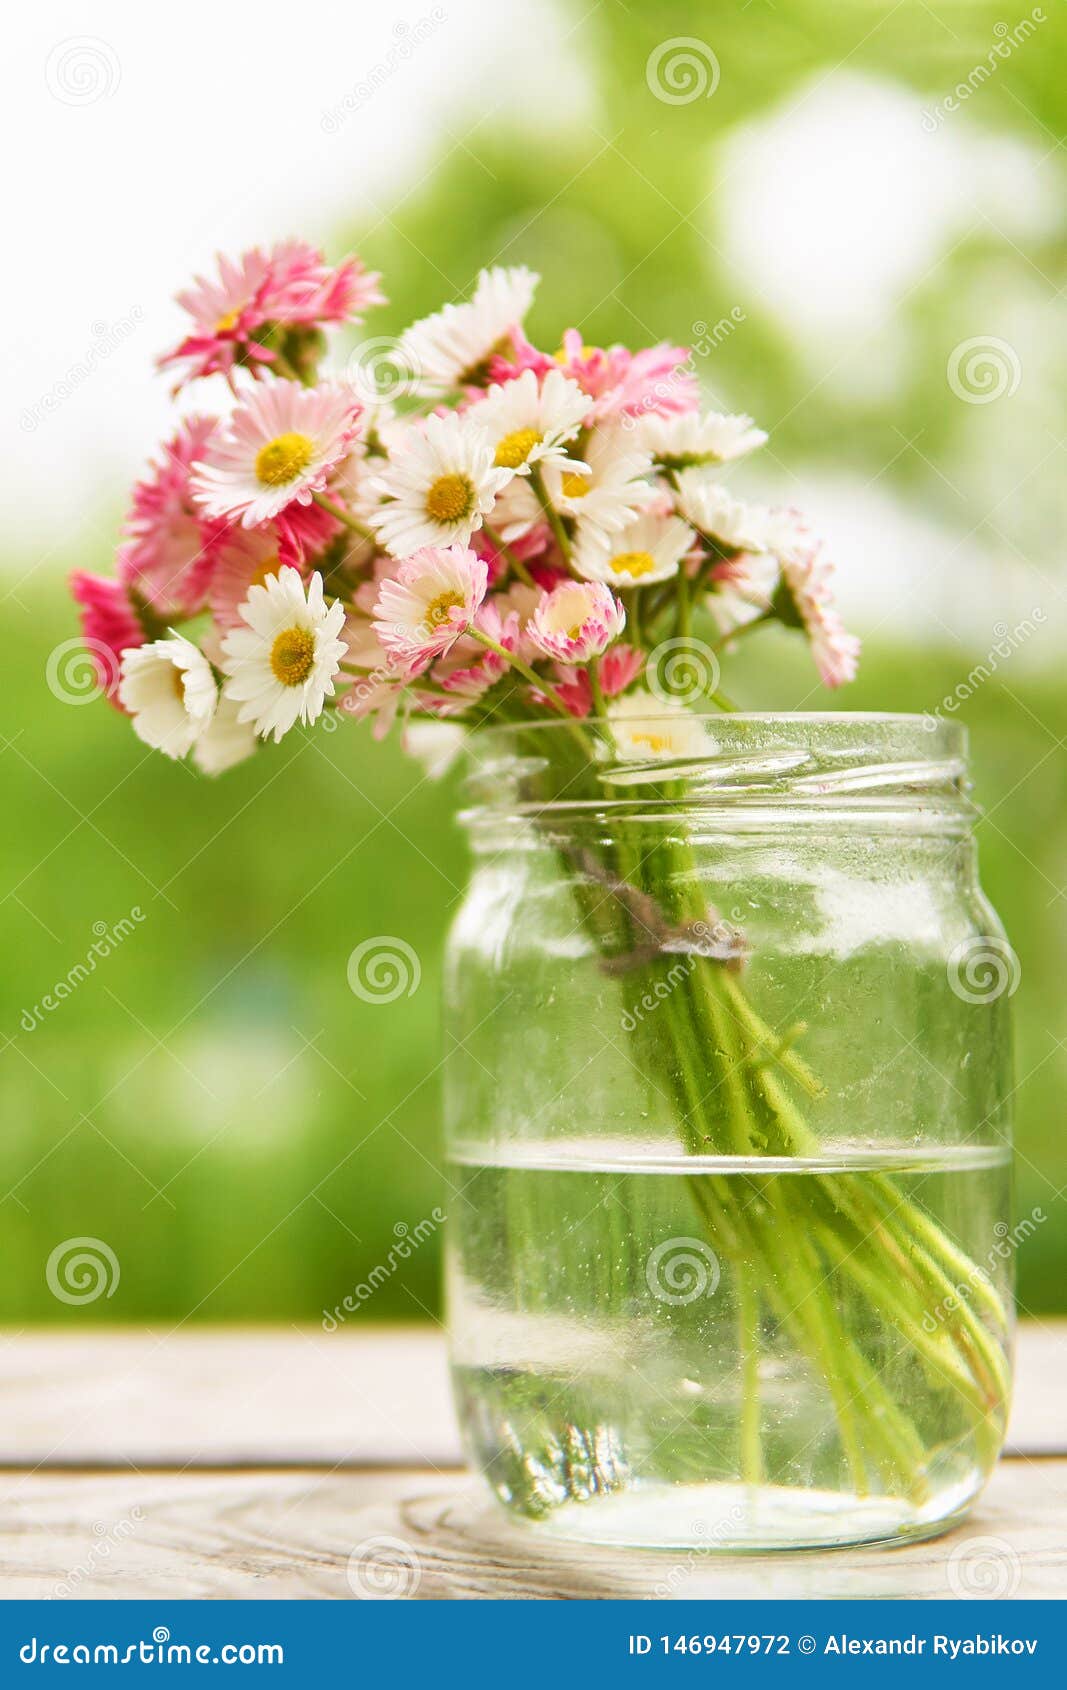 Dry Daisy Flowers In A Glass Jar Stock Photo - Download Image Now